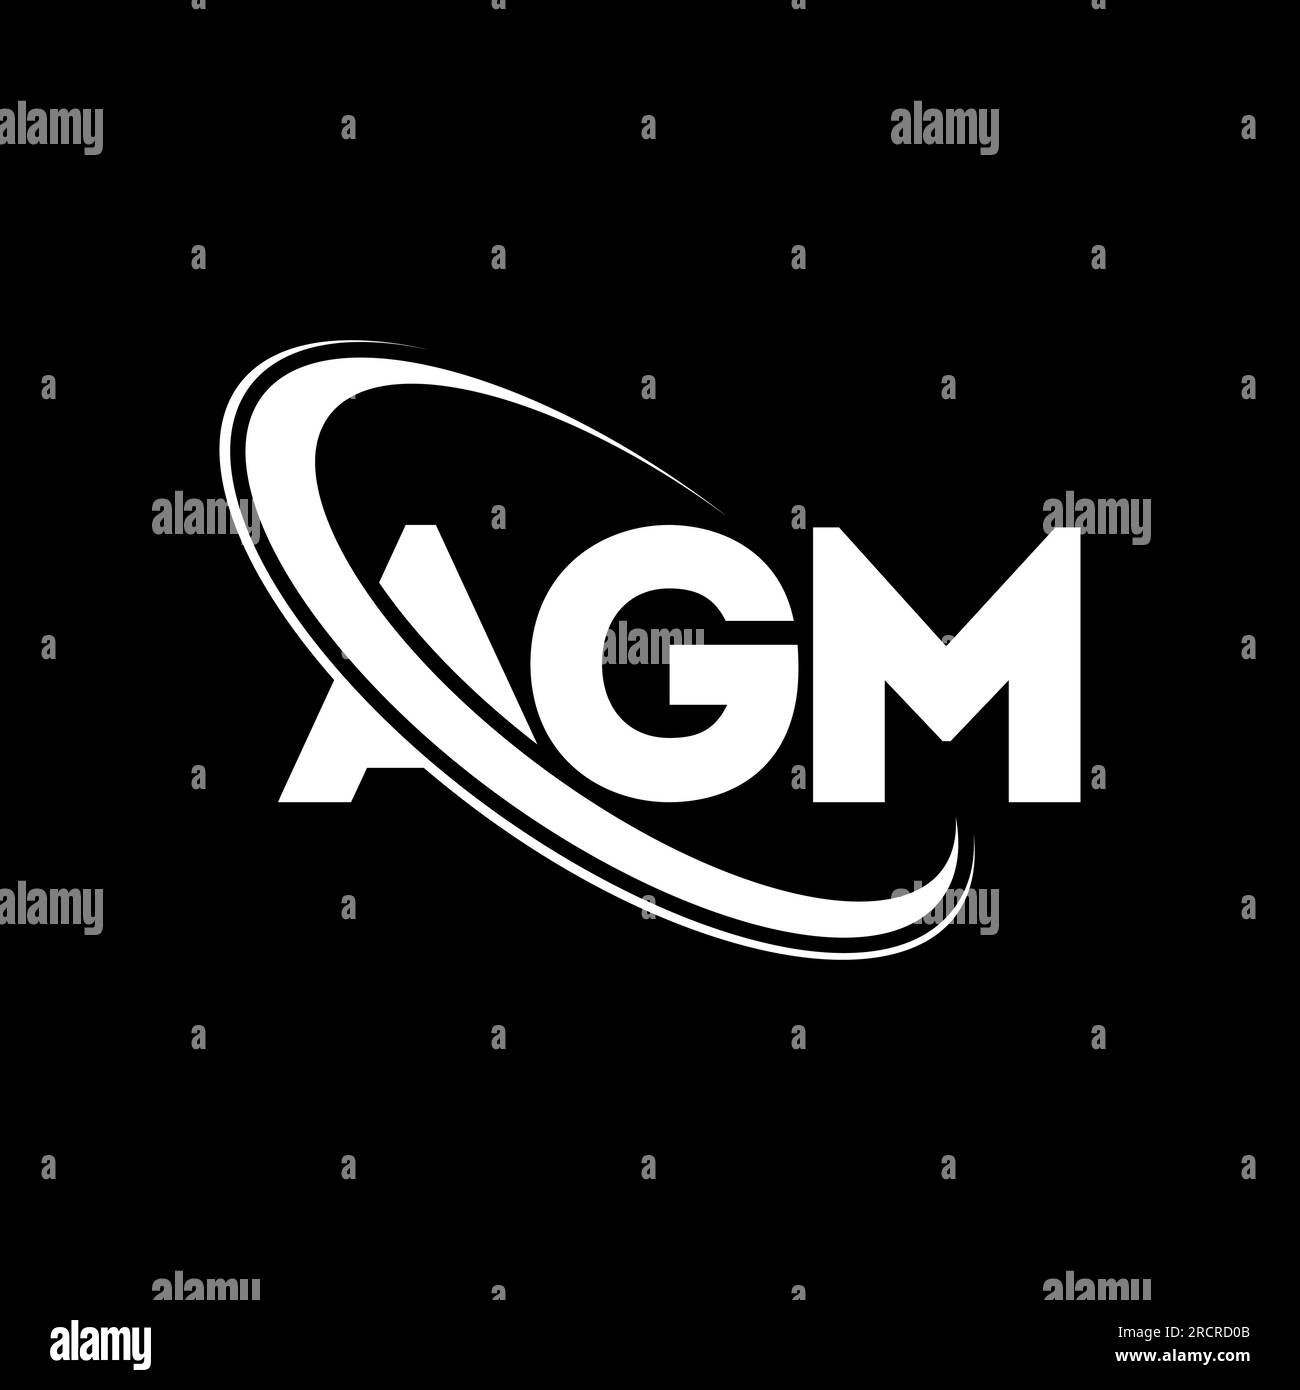 AGM logo. AGM letter. AGM letter logo design. Initials AGM logo linked with circle and uppercase monogram logo. AGM typography for technology, busines Stock Vector